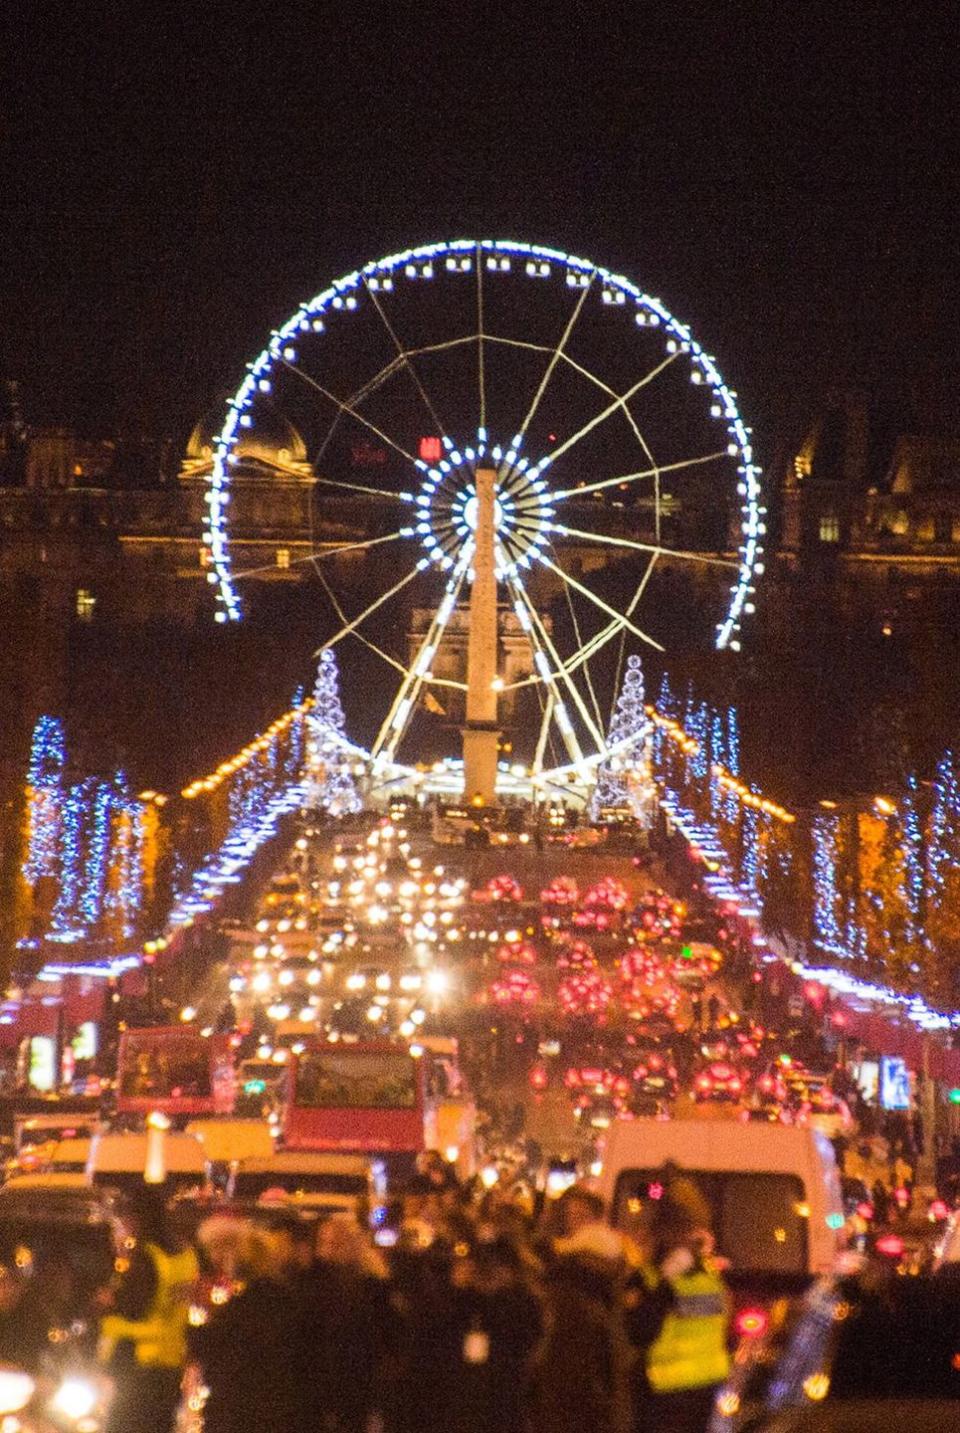 And finally... the Champs-Elysees look like THIS.